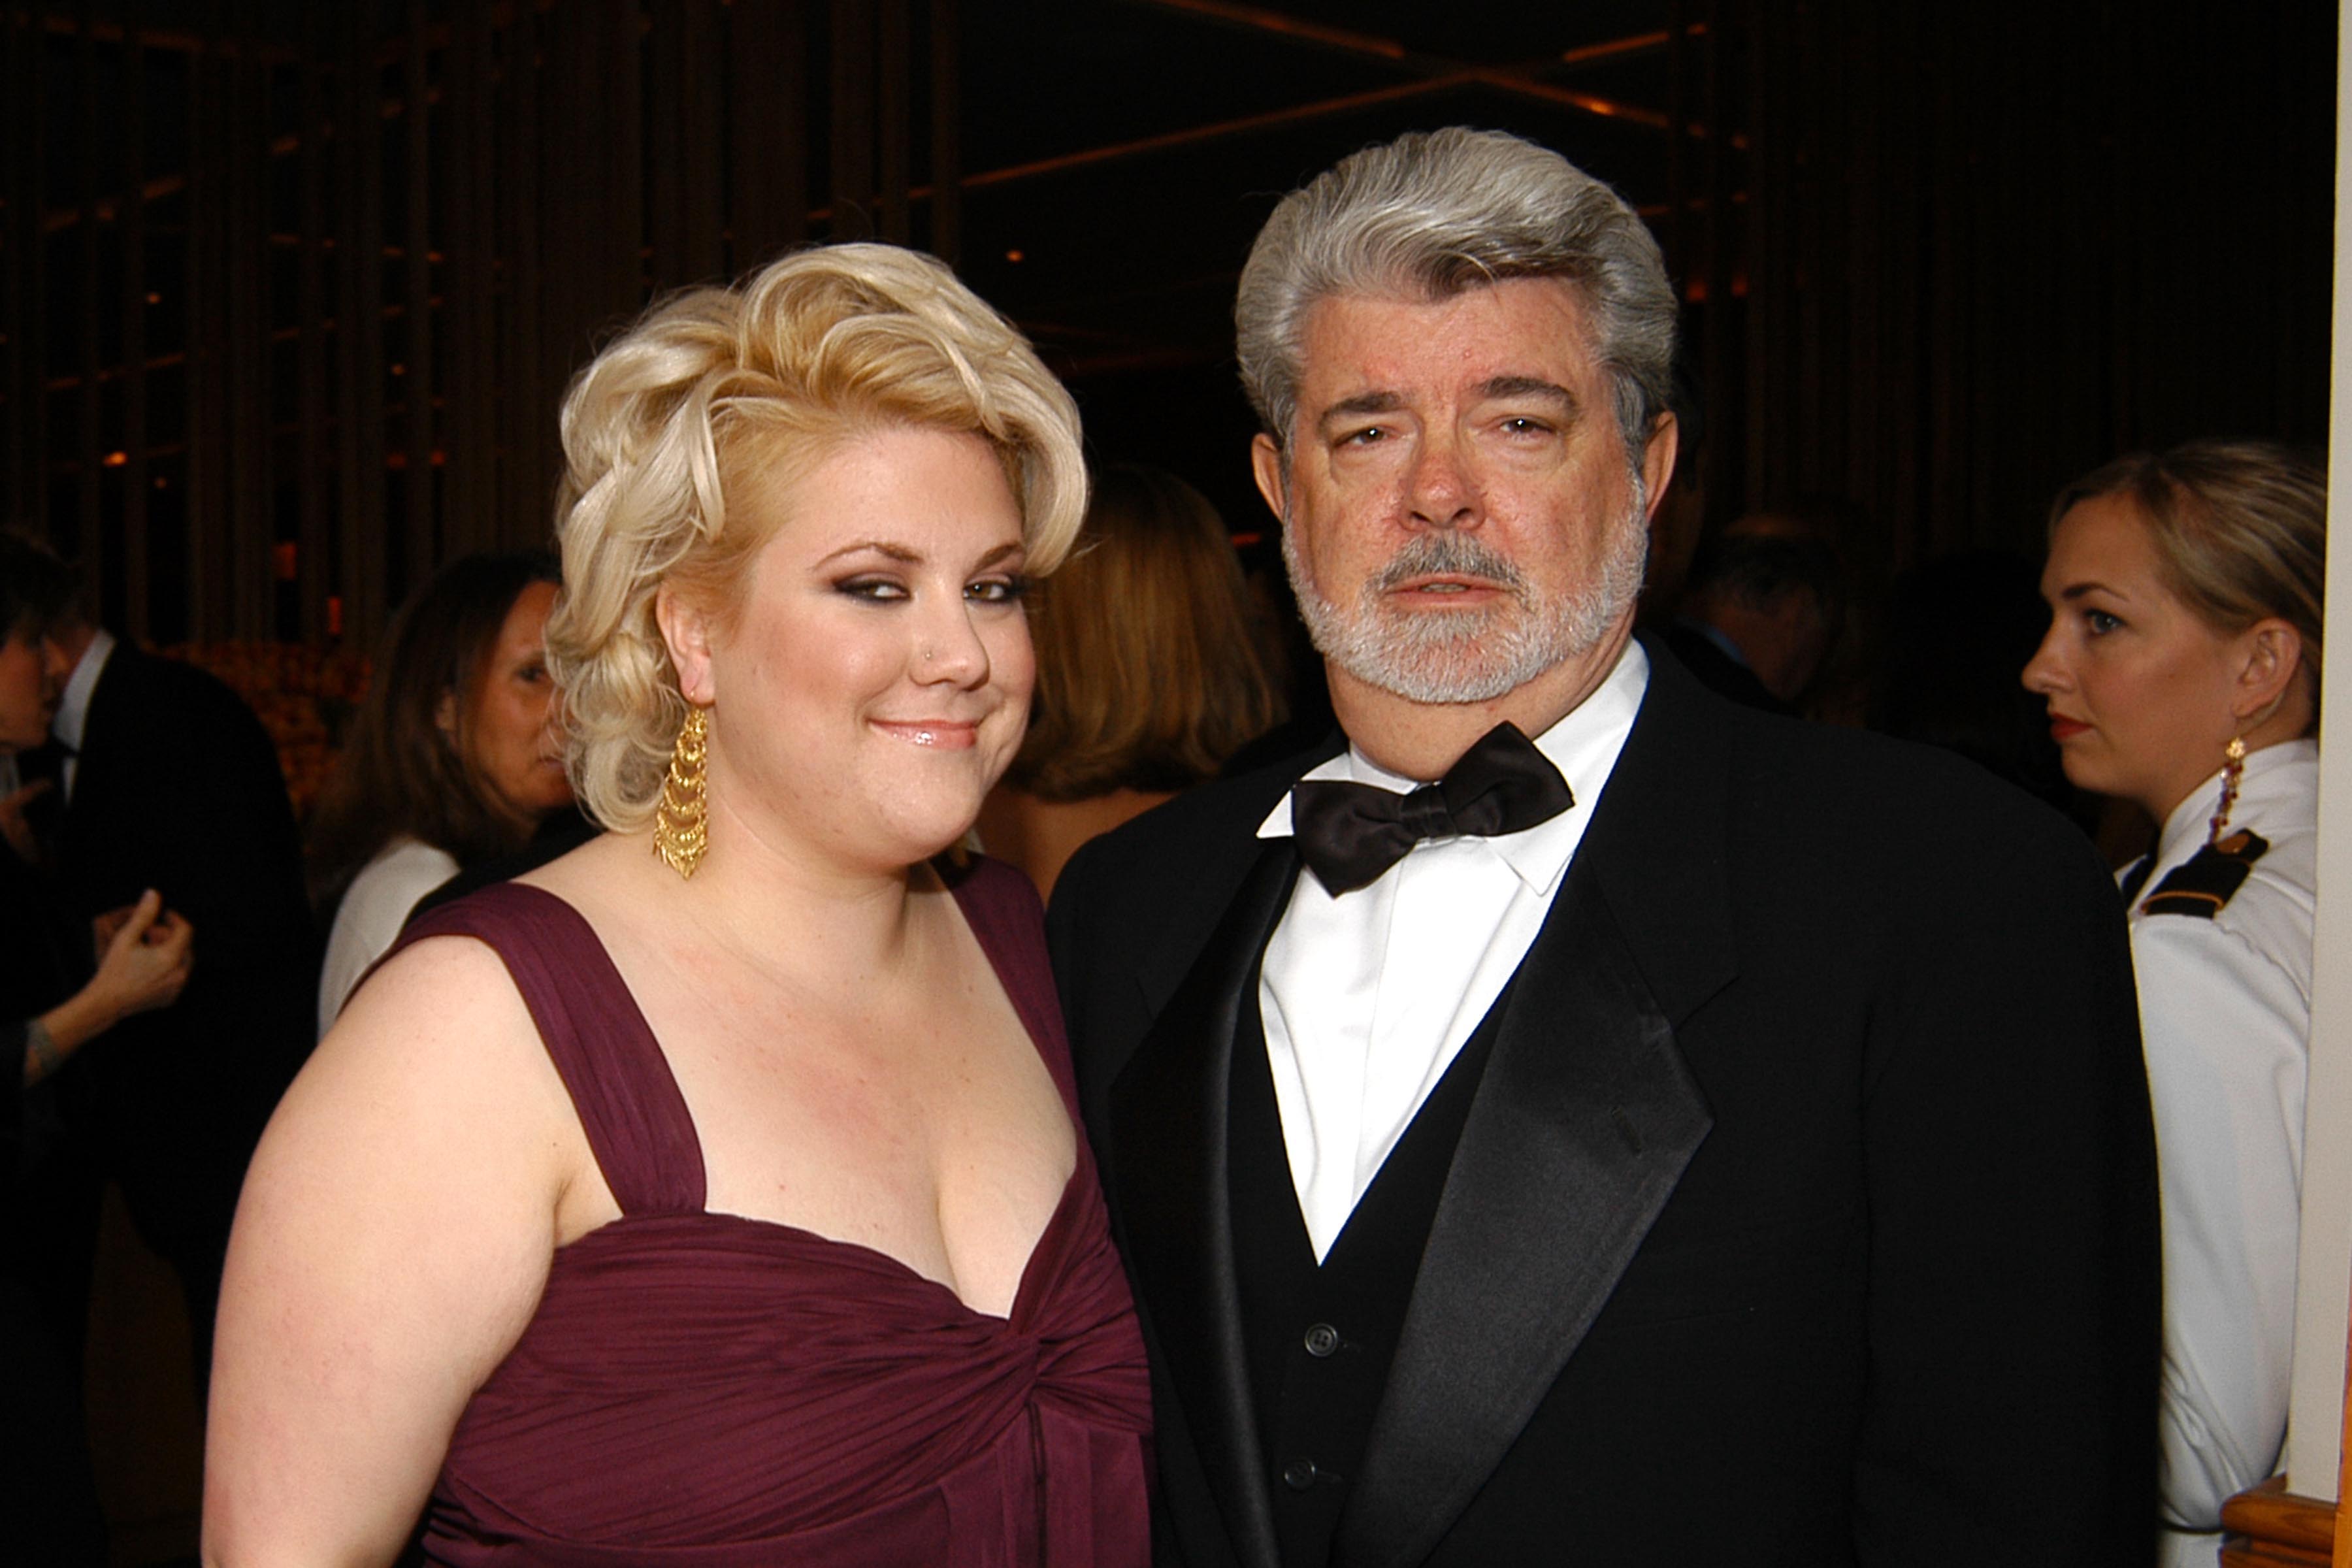 Katie Lucas and George Lucas at the Vanity Fair Oscar Party on March 5, 2006 | Source: Getty Images